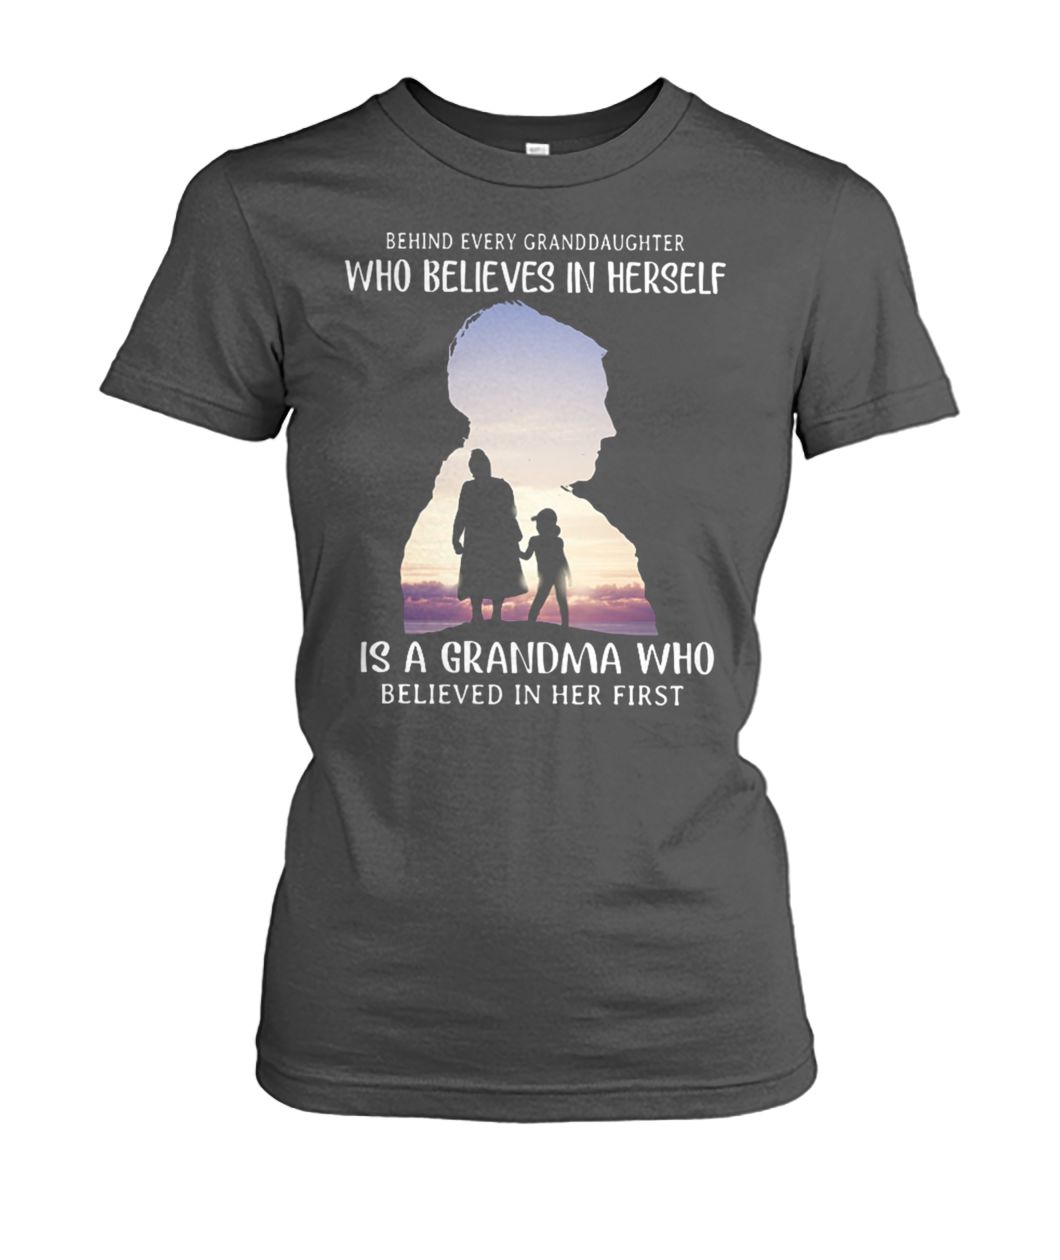 Behind every granddaughter who believes in herself is a grandma who believed in her first women's crew tee